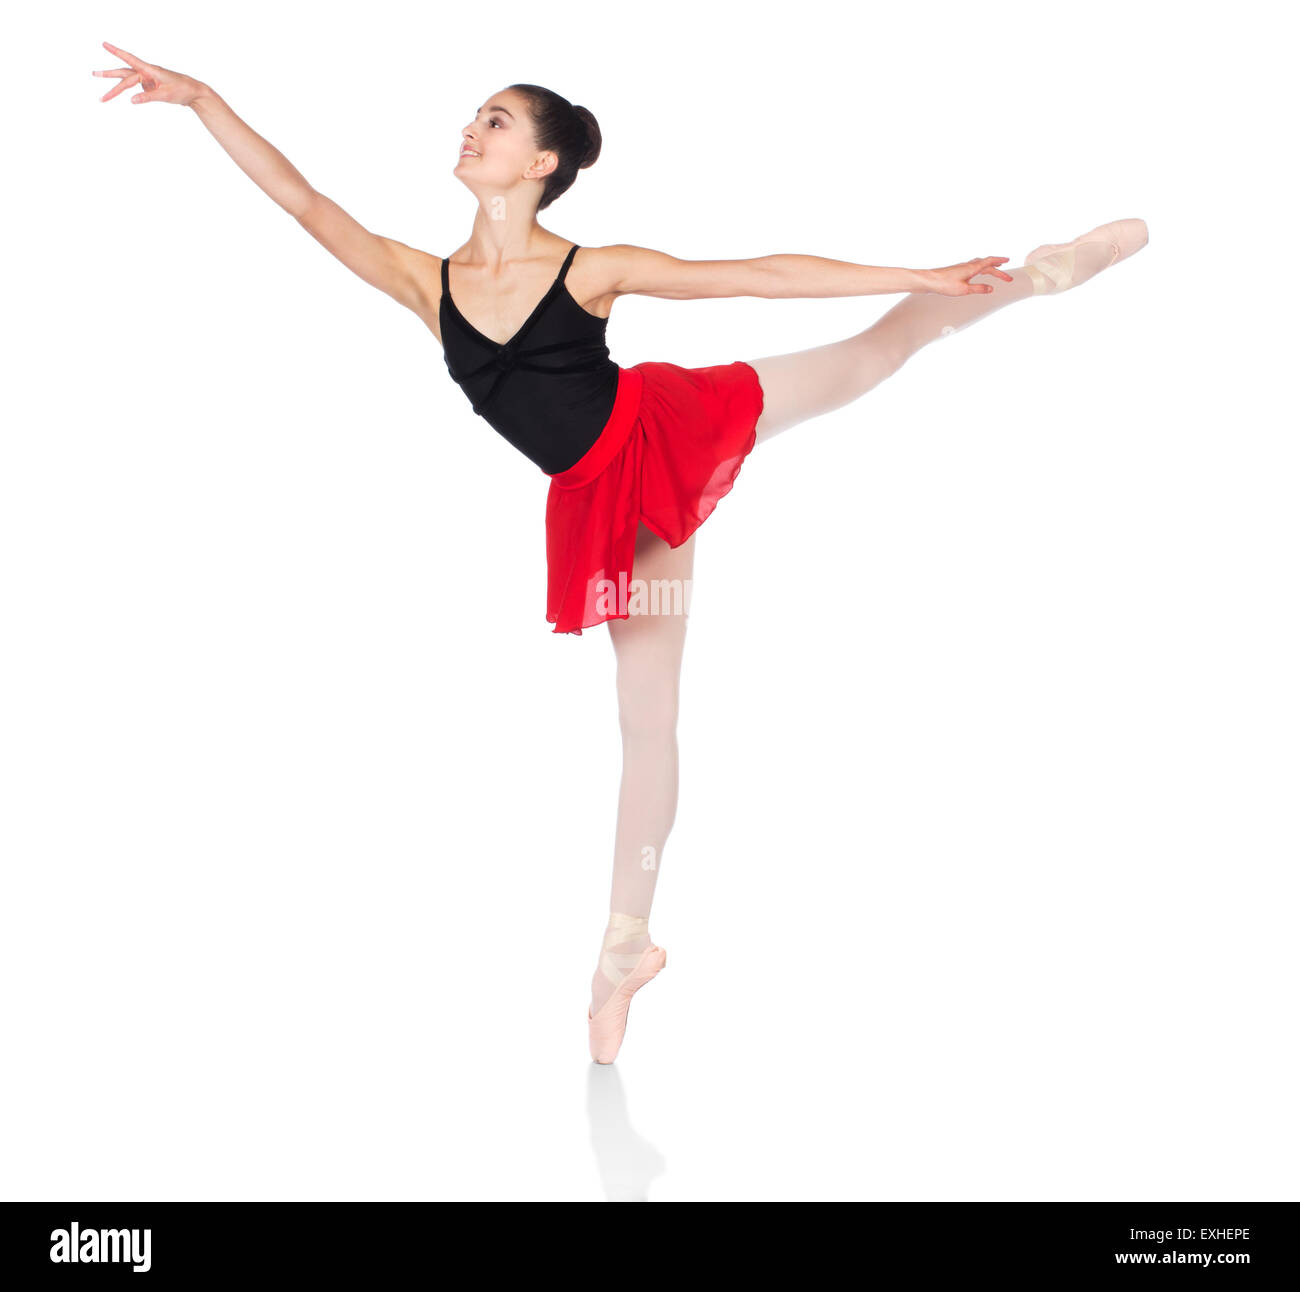 I forhold Avenue Forgænger Beautiful female ballet dancer isolated on a white background. Ballerina is  wearing a black leotard, pink stockings, pointe shoe Stock Photo - Alamy